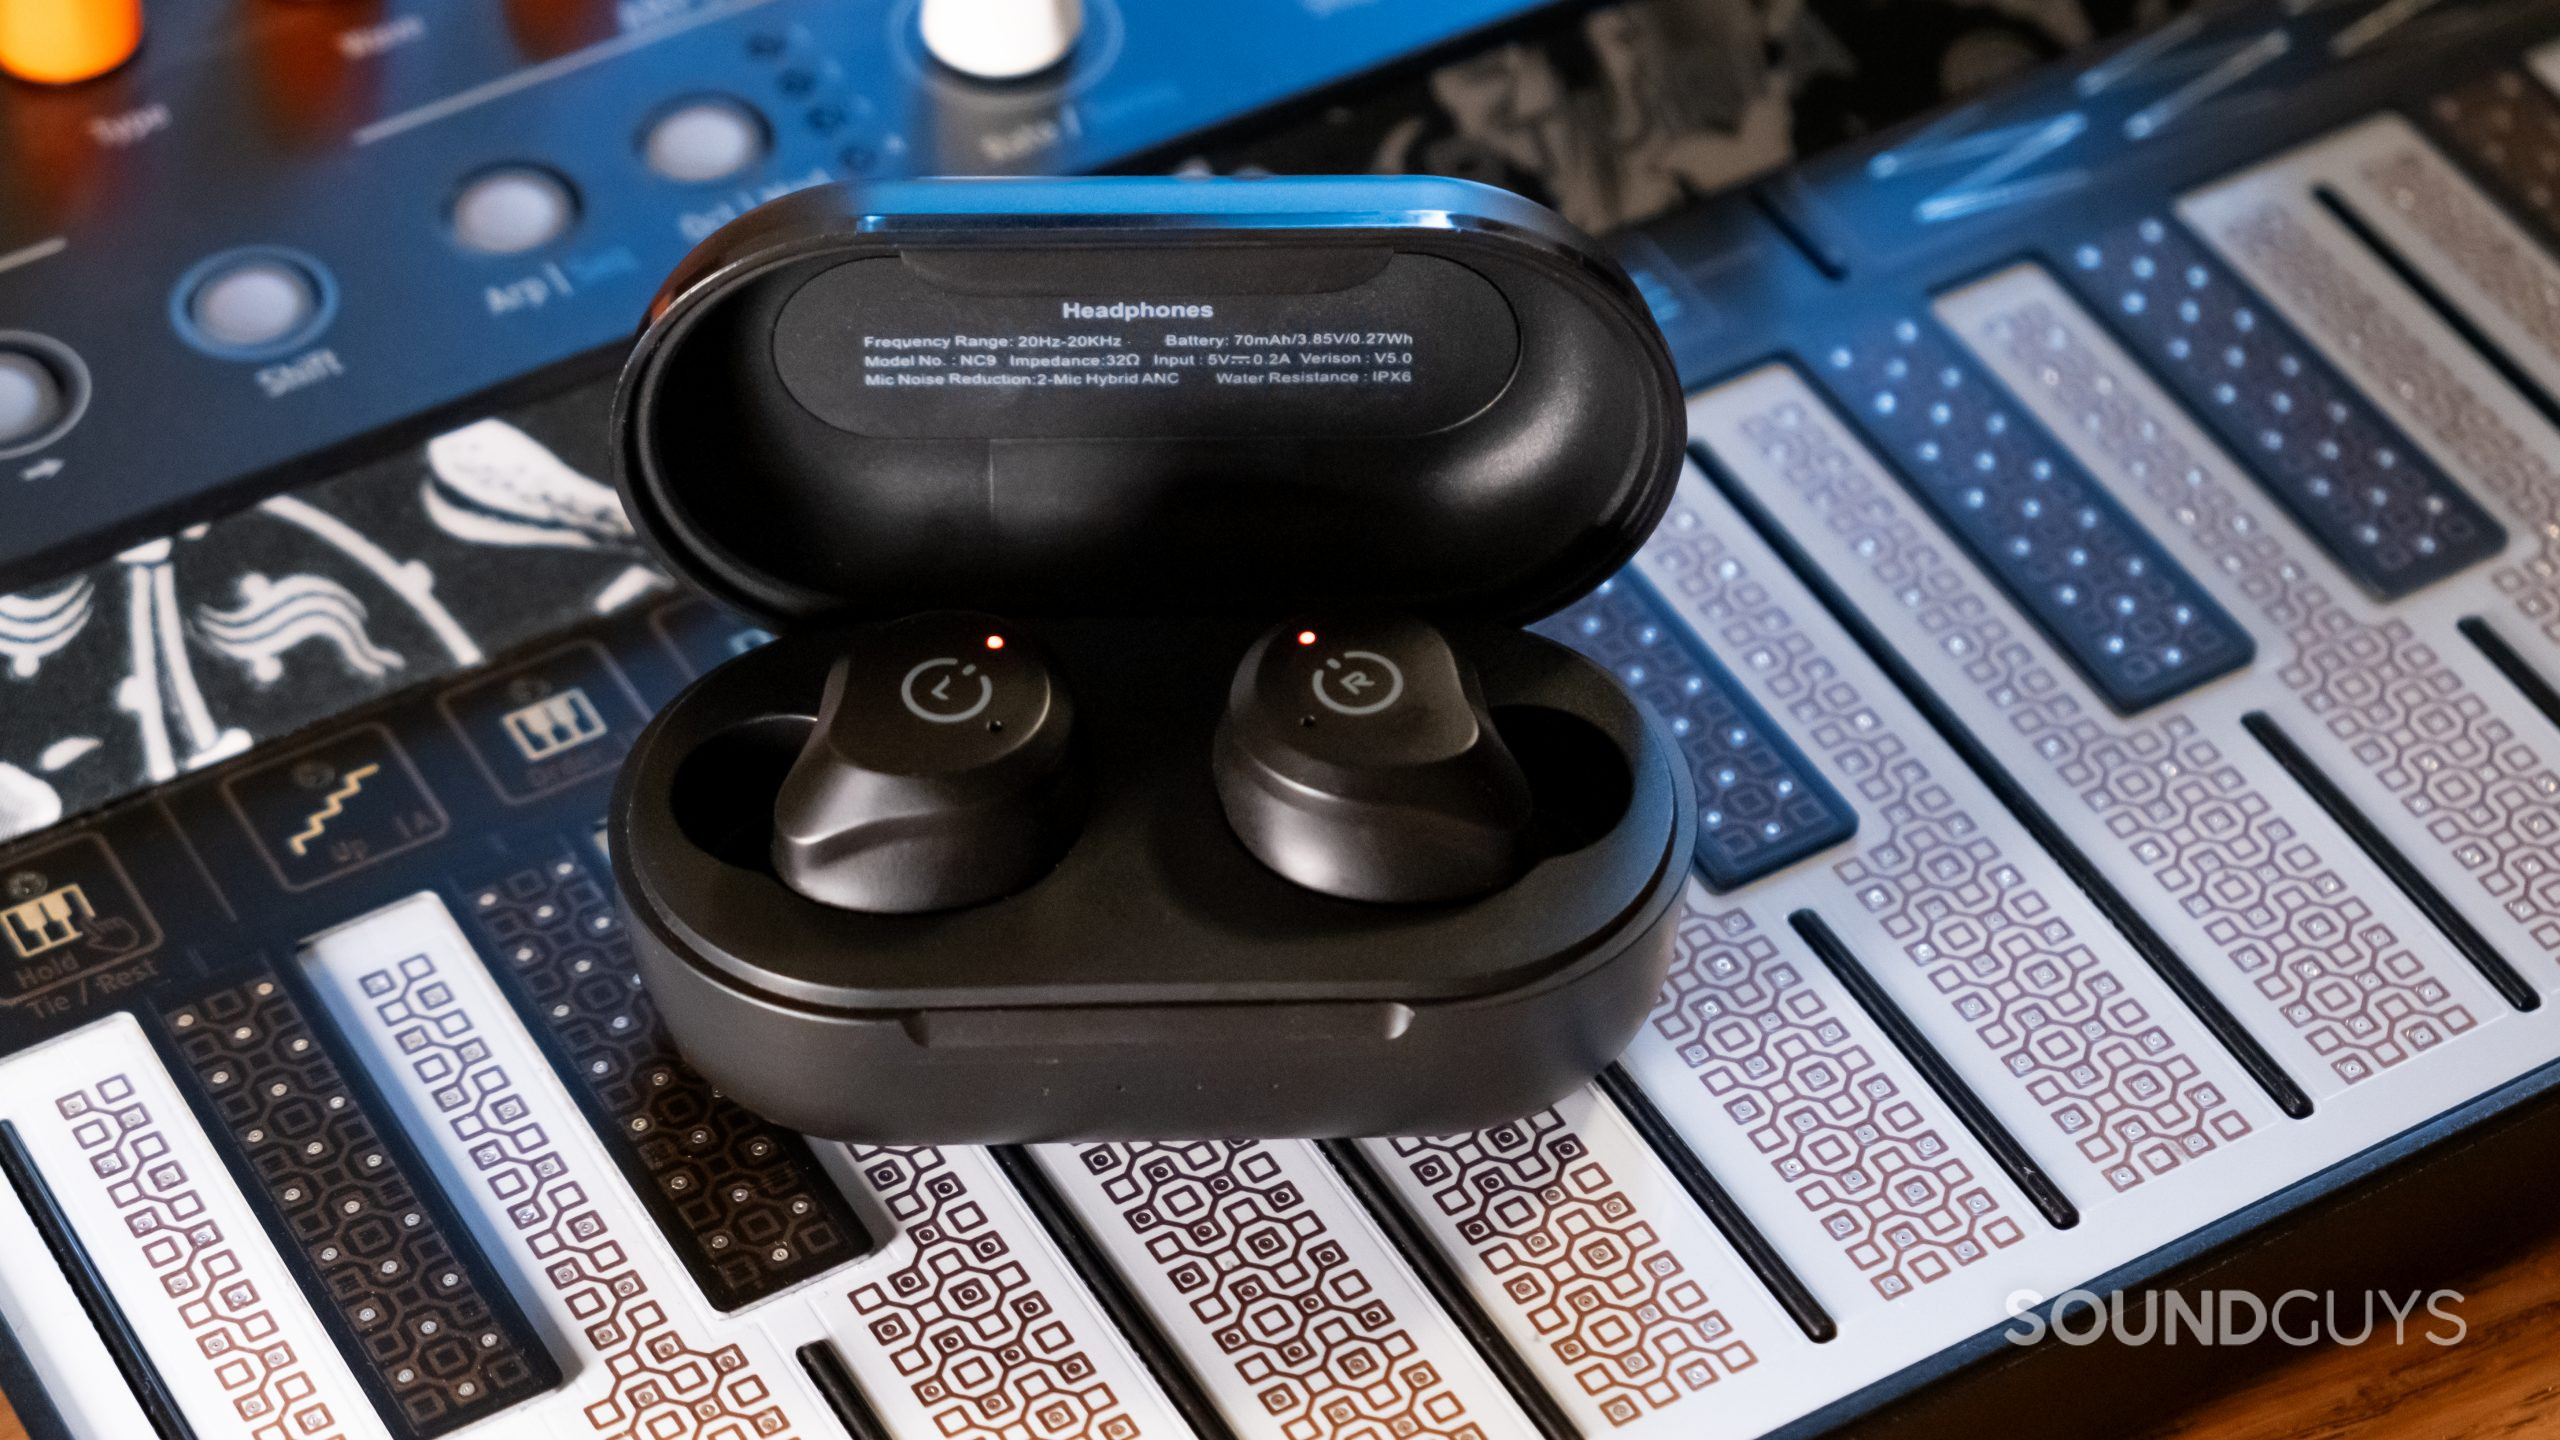 The TOZO NC9 wireless earbuds rest in the open case on top of a synthesizer.